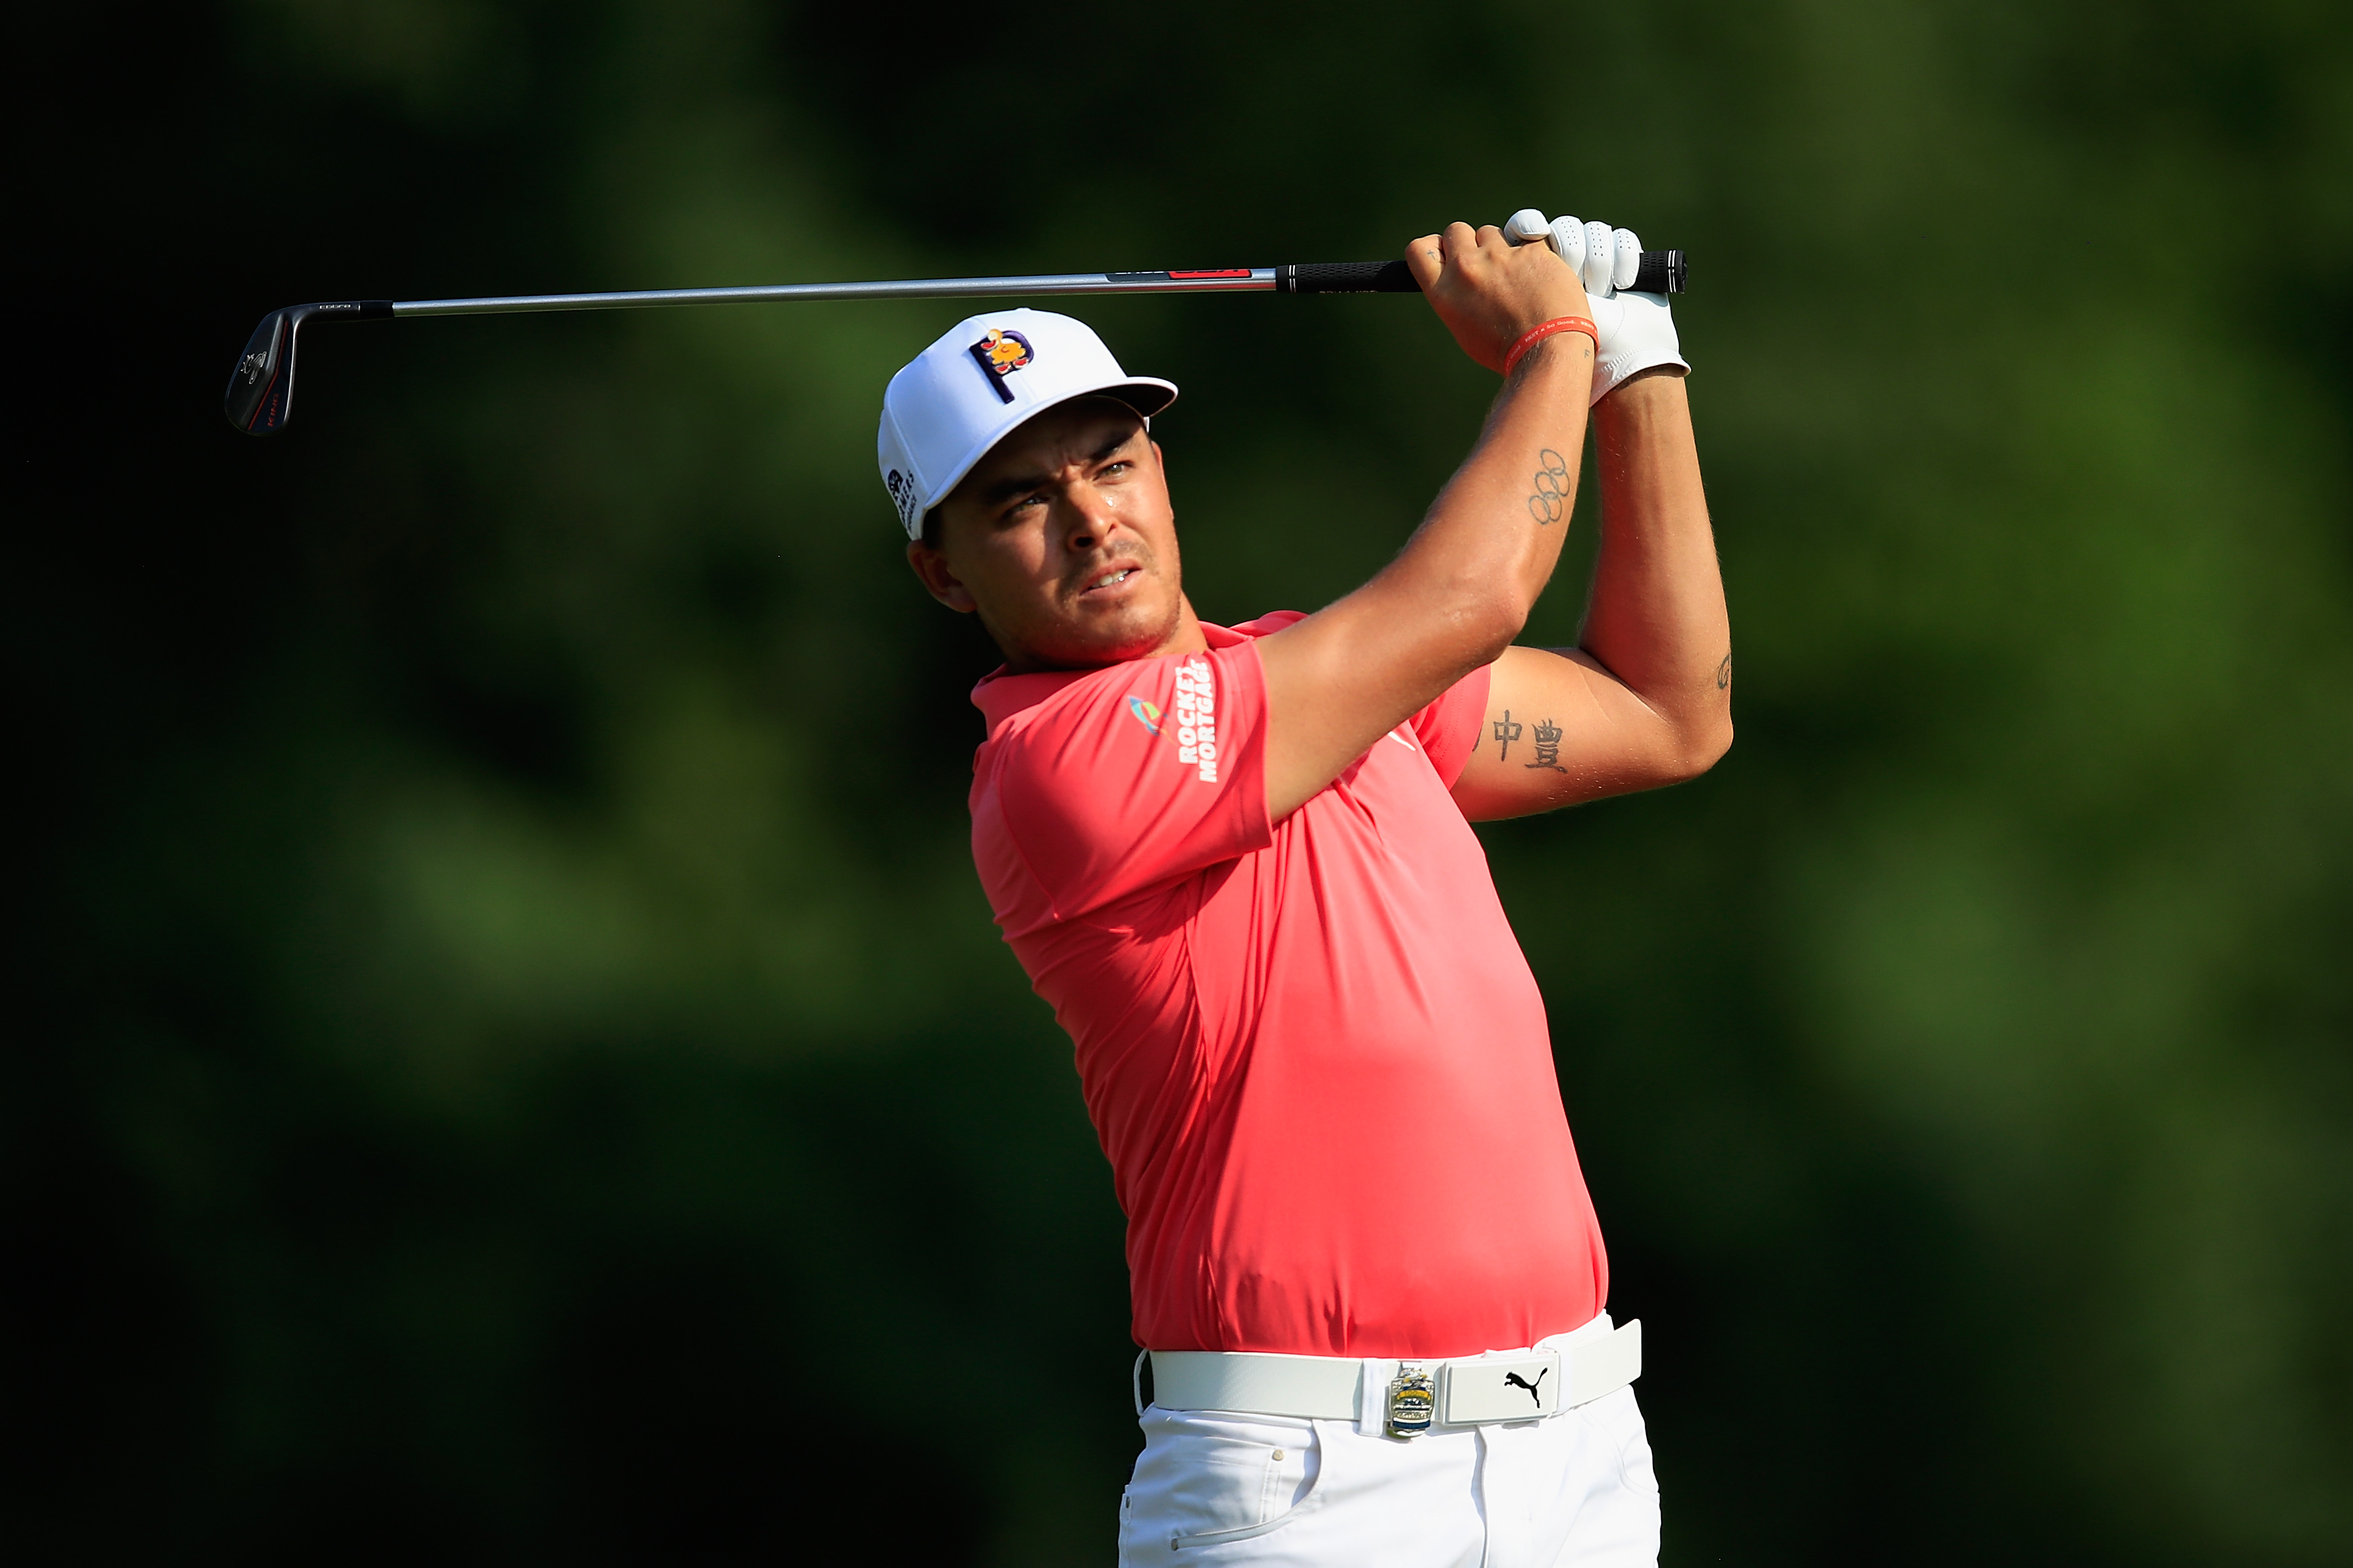 Five storylines to follow entering Sunday's finale in the PGA Championship